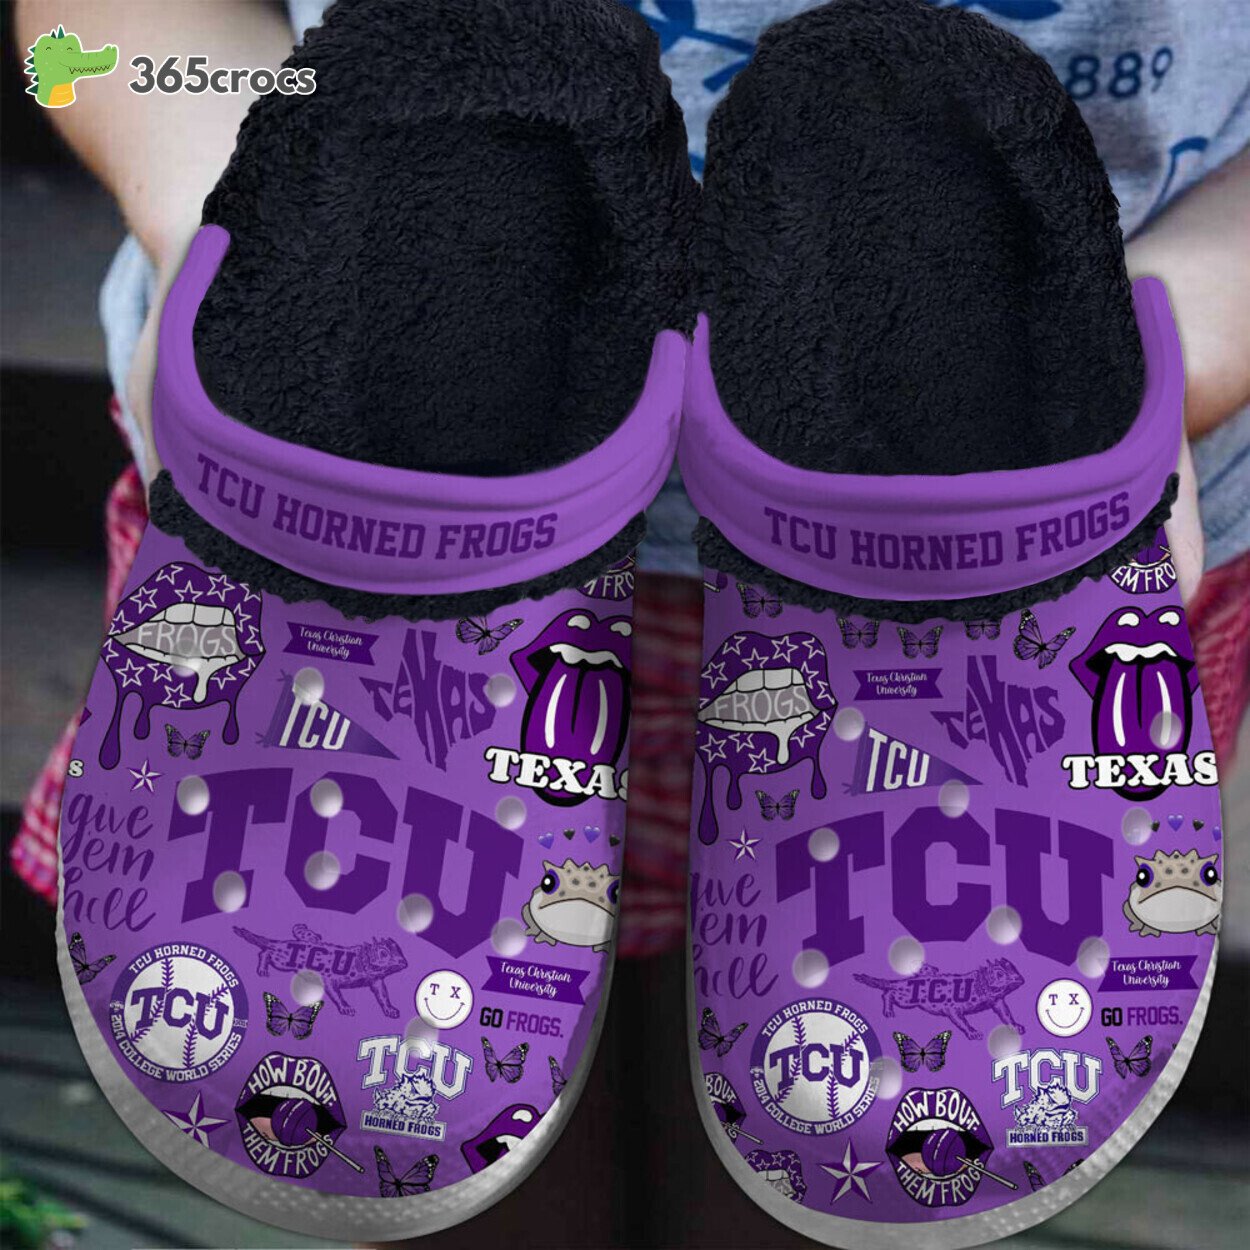 TCU Horned Frogs NCAA Comfortable Premium Lined Crocss Shoes Sporty Design